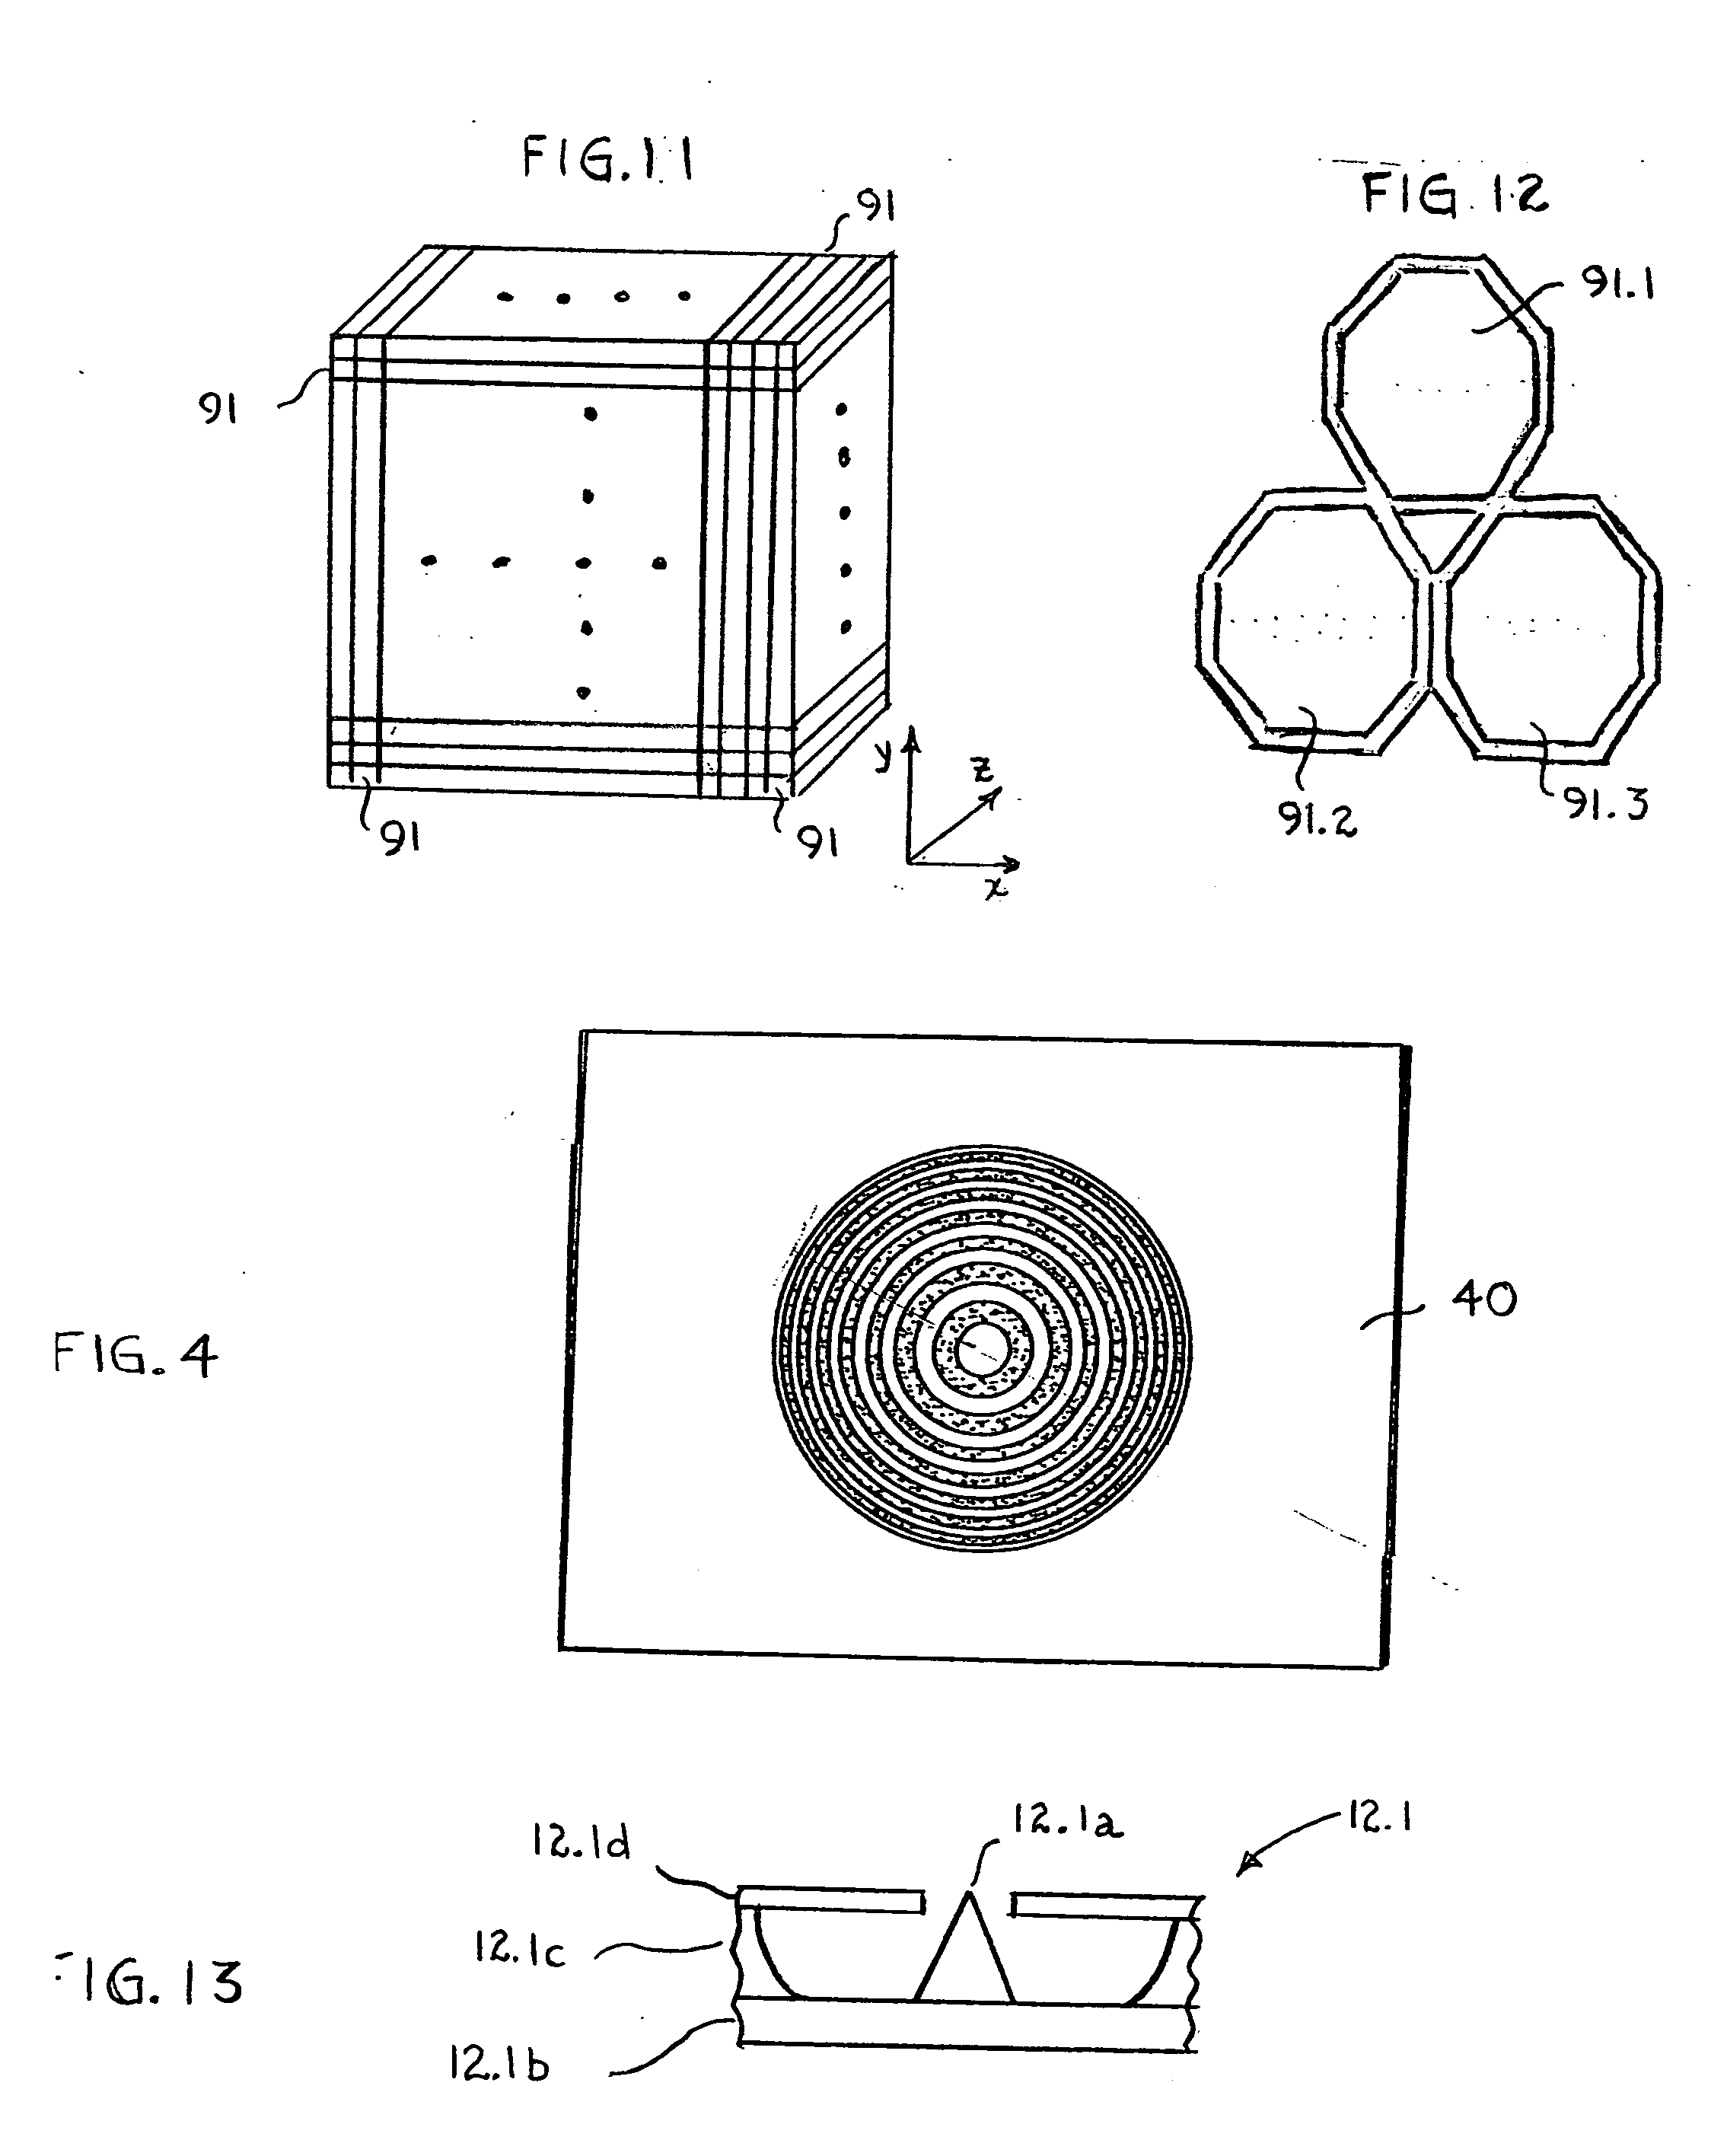 Focusable and steerable micro-miniature x-ray apparatus